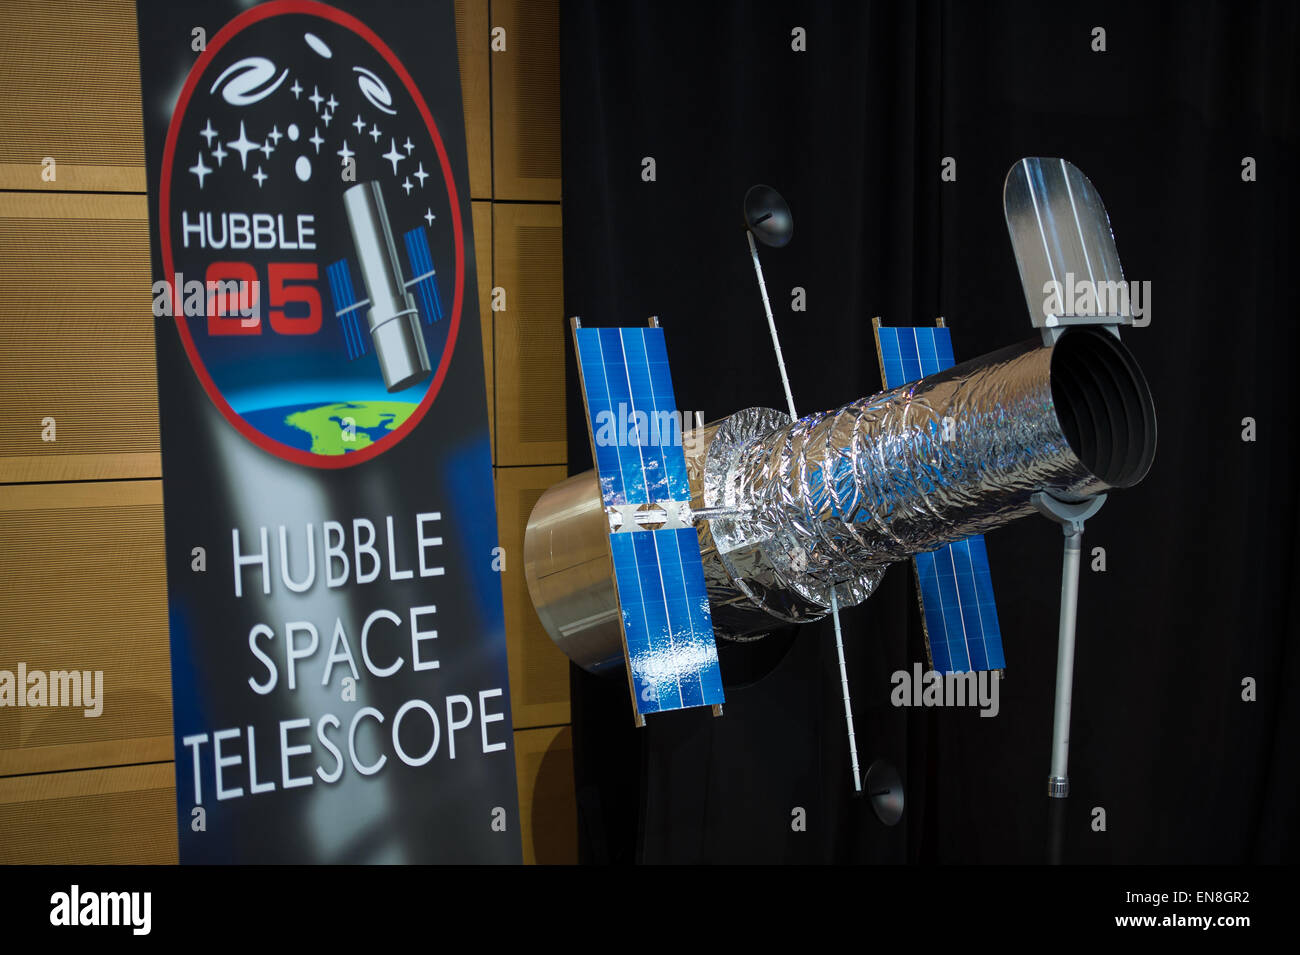 A model of the Hubble Space Telescope is seen here at the Hubble 25th Anniversary official image debut event on Thursday, April 23, 2015 at the Newseum in Washington, DC. The official image from Hubble's near-infrared Wide Field Camera 3 is of a two million year old cluster of about 3,000 stars called Westerlund 2, named after the astronomer who discovered it in the 1960s. Westerlund 2 is located in the constellation Carina about 20,000 light-years away from Earth. Stock Photo